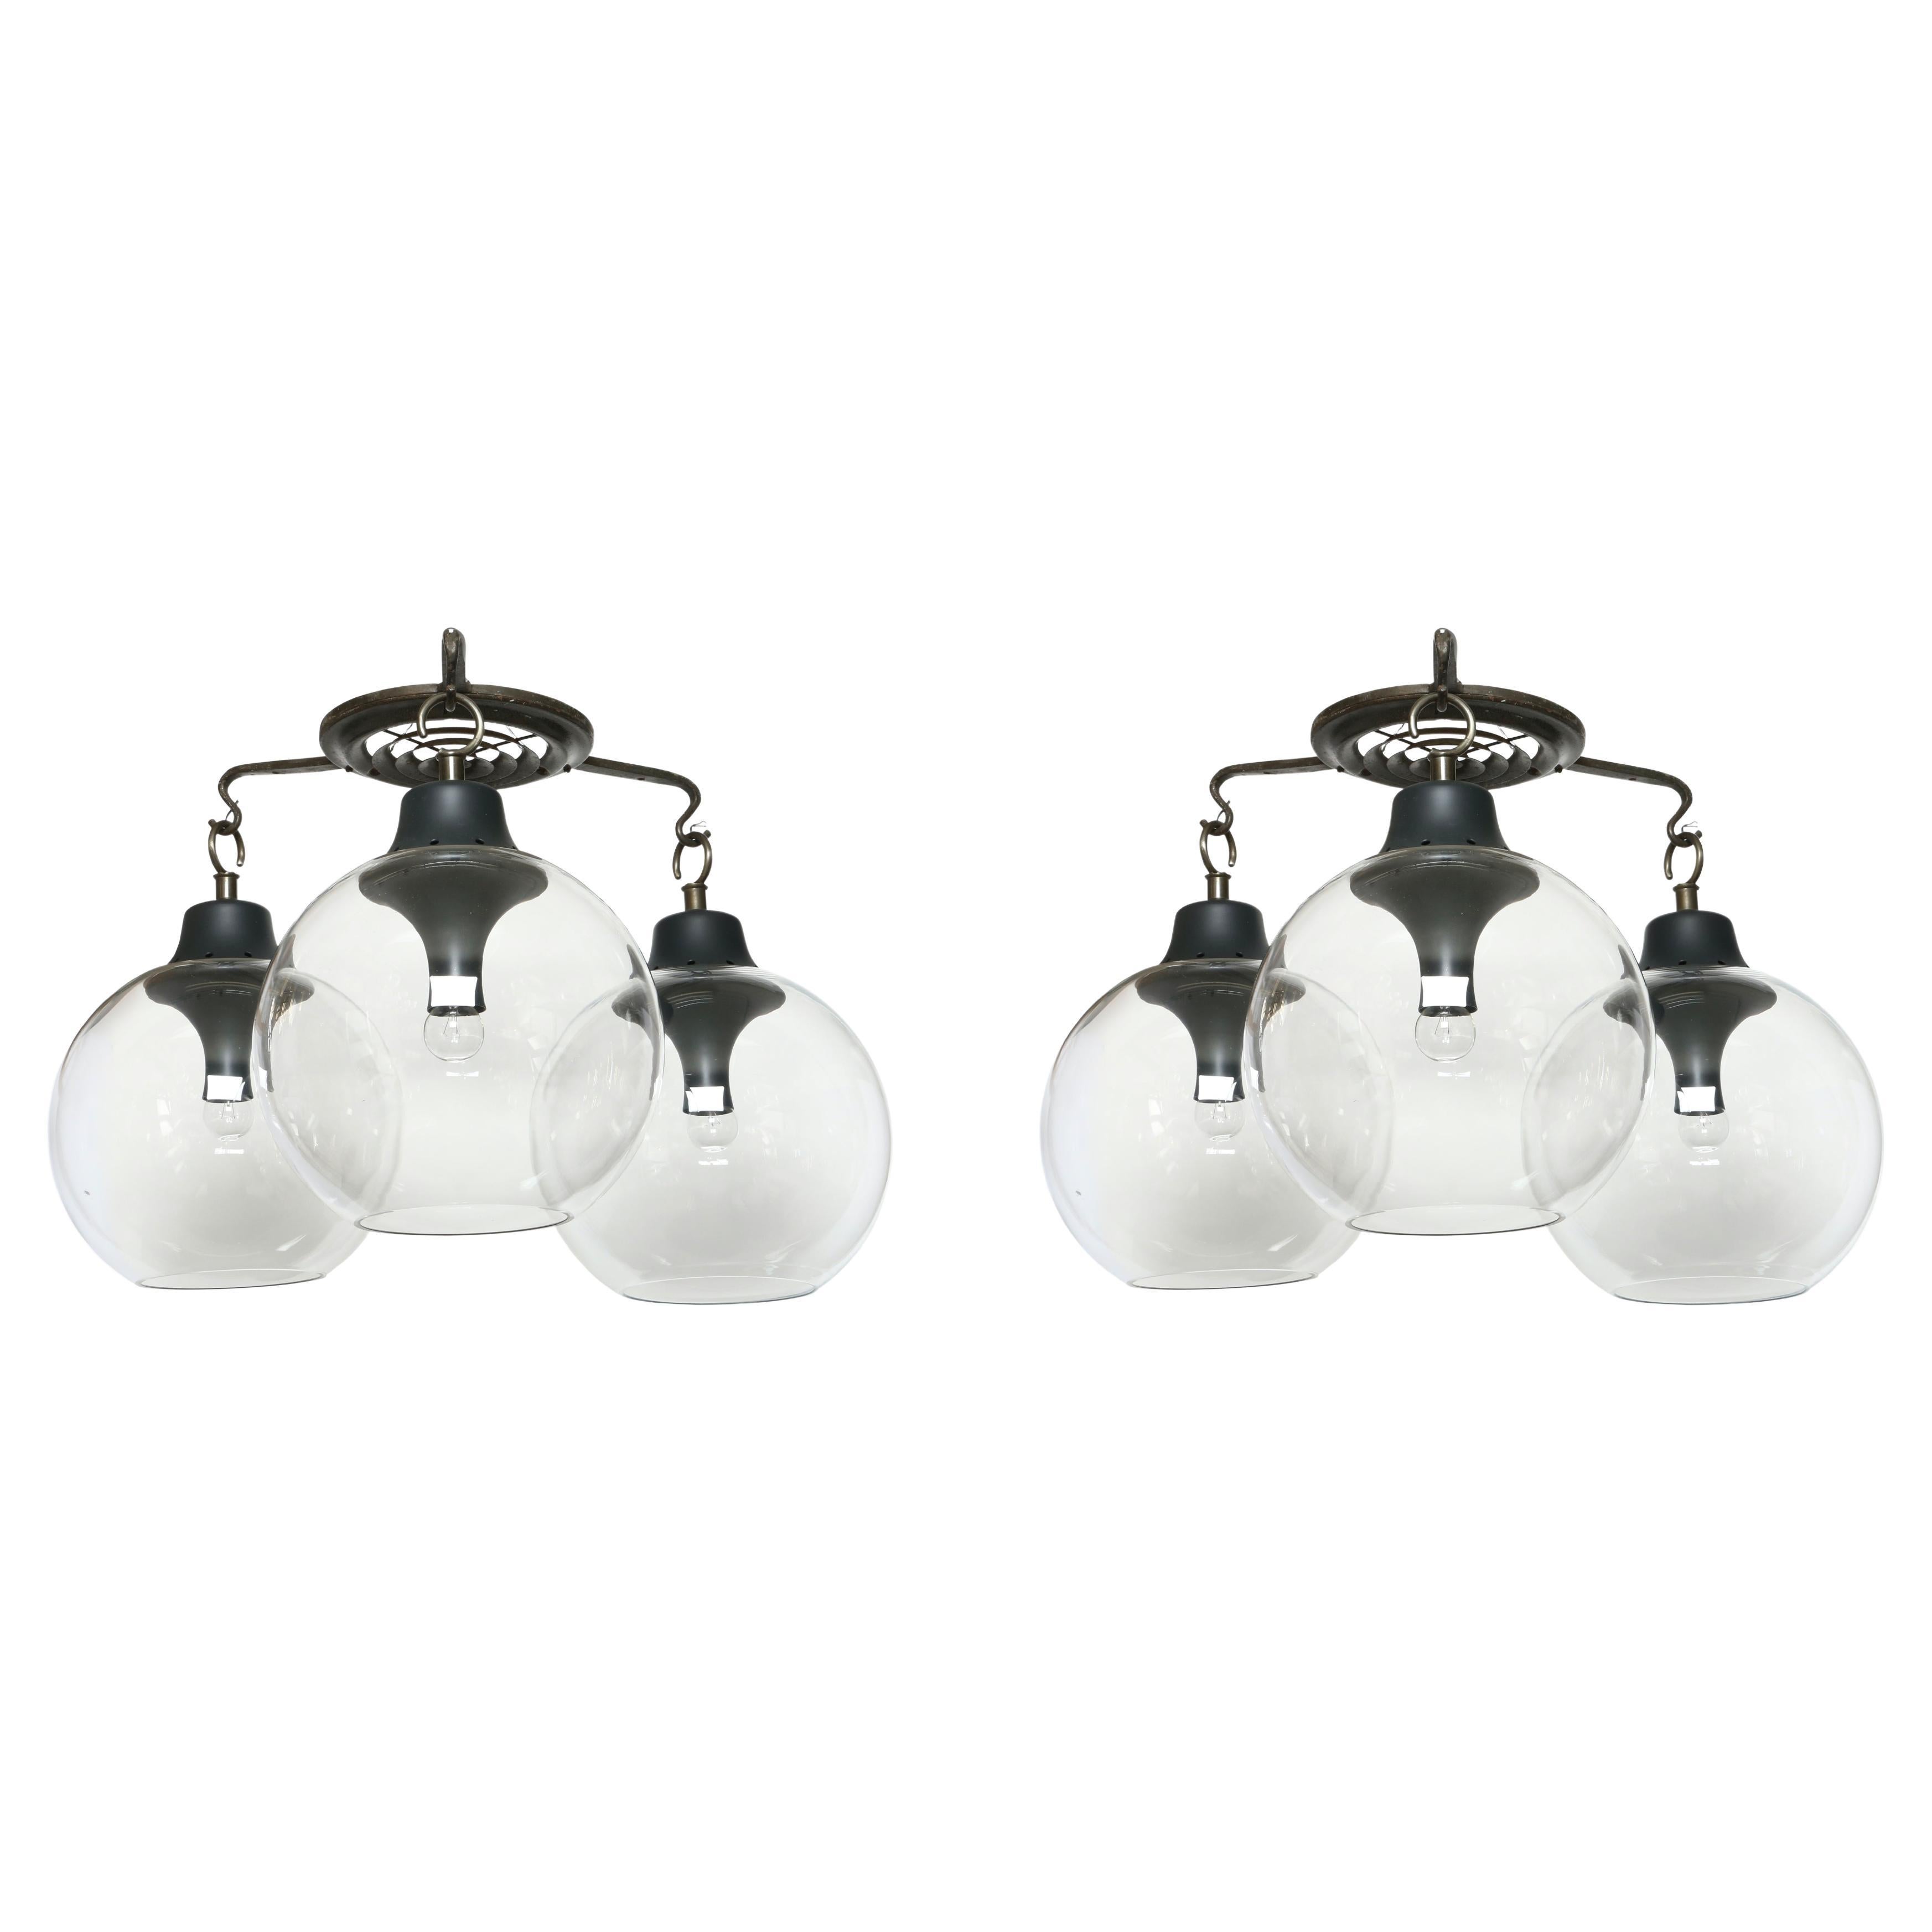 Luigi Caccia Dominioni for Azucena "Grappolo" Ceiling Lights LS10 Large, a pair For Sale